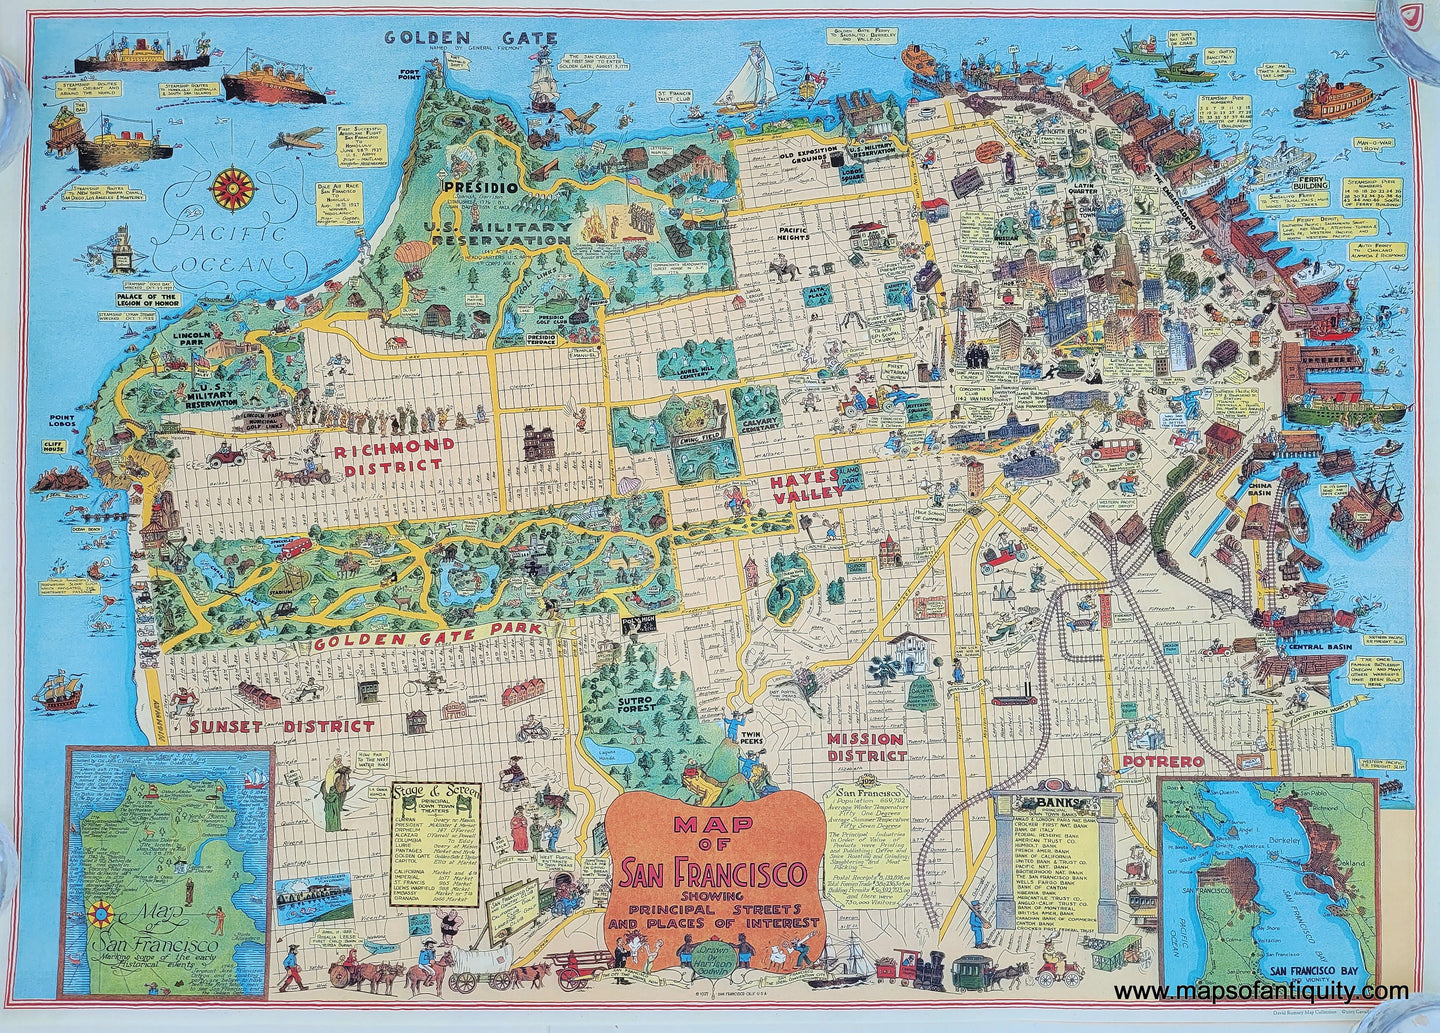 Reproduction-Map-of-San-Francisco-showing-Principal-Streets-and-Places-of-Interest---Maps-Of-Antiquity